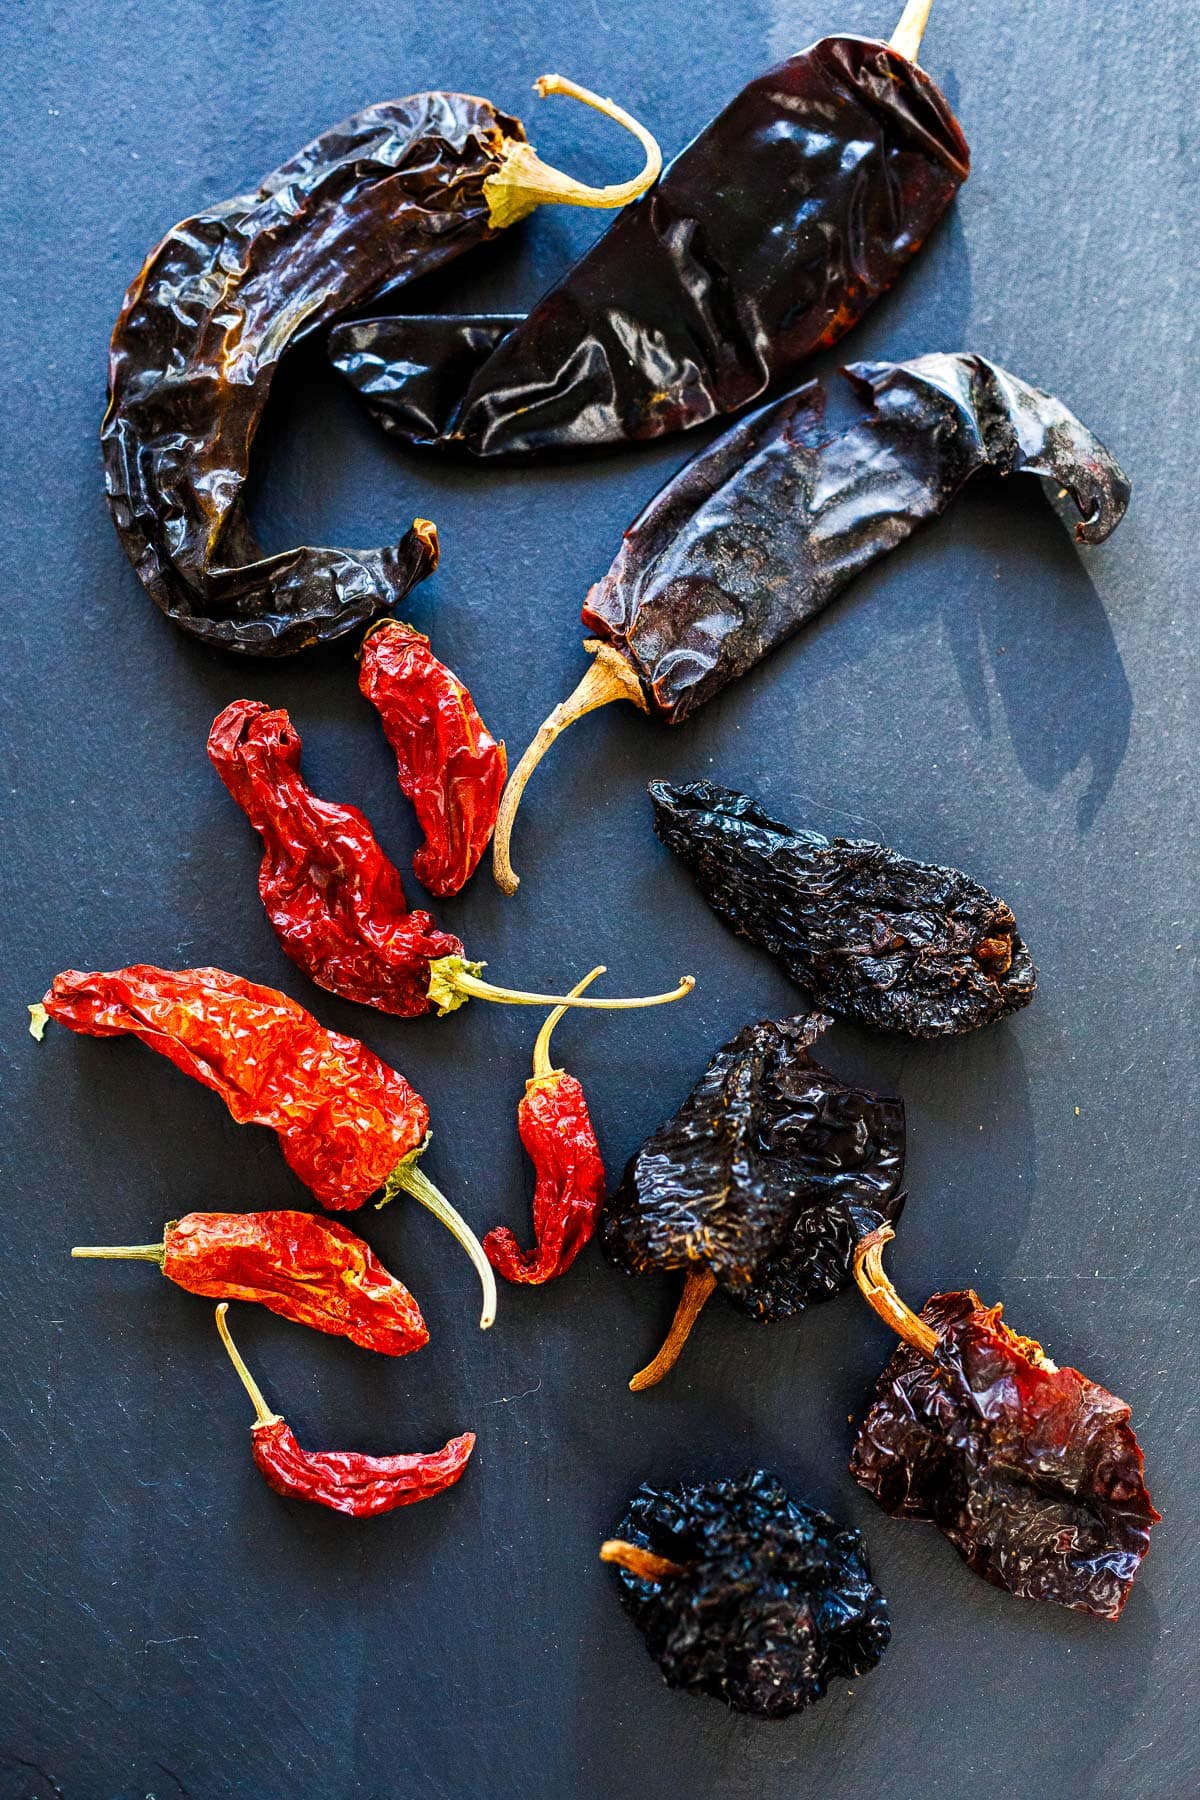 assorted dried chilies laid out.